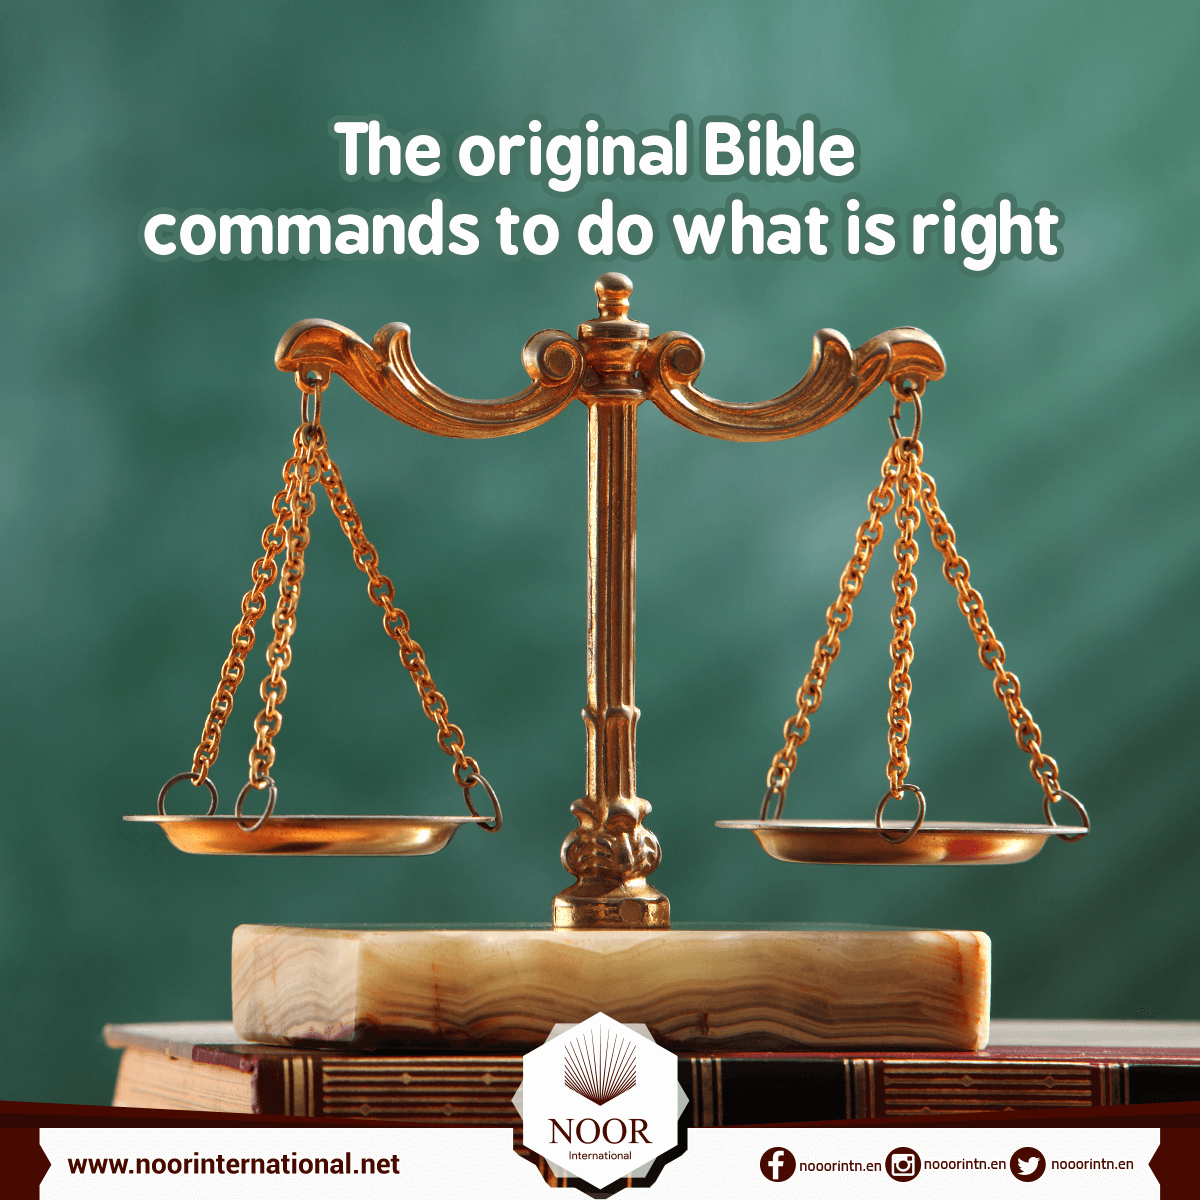 The original Bible commands to do what is right